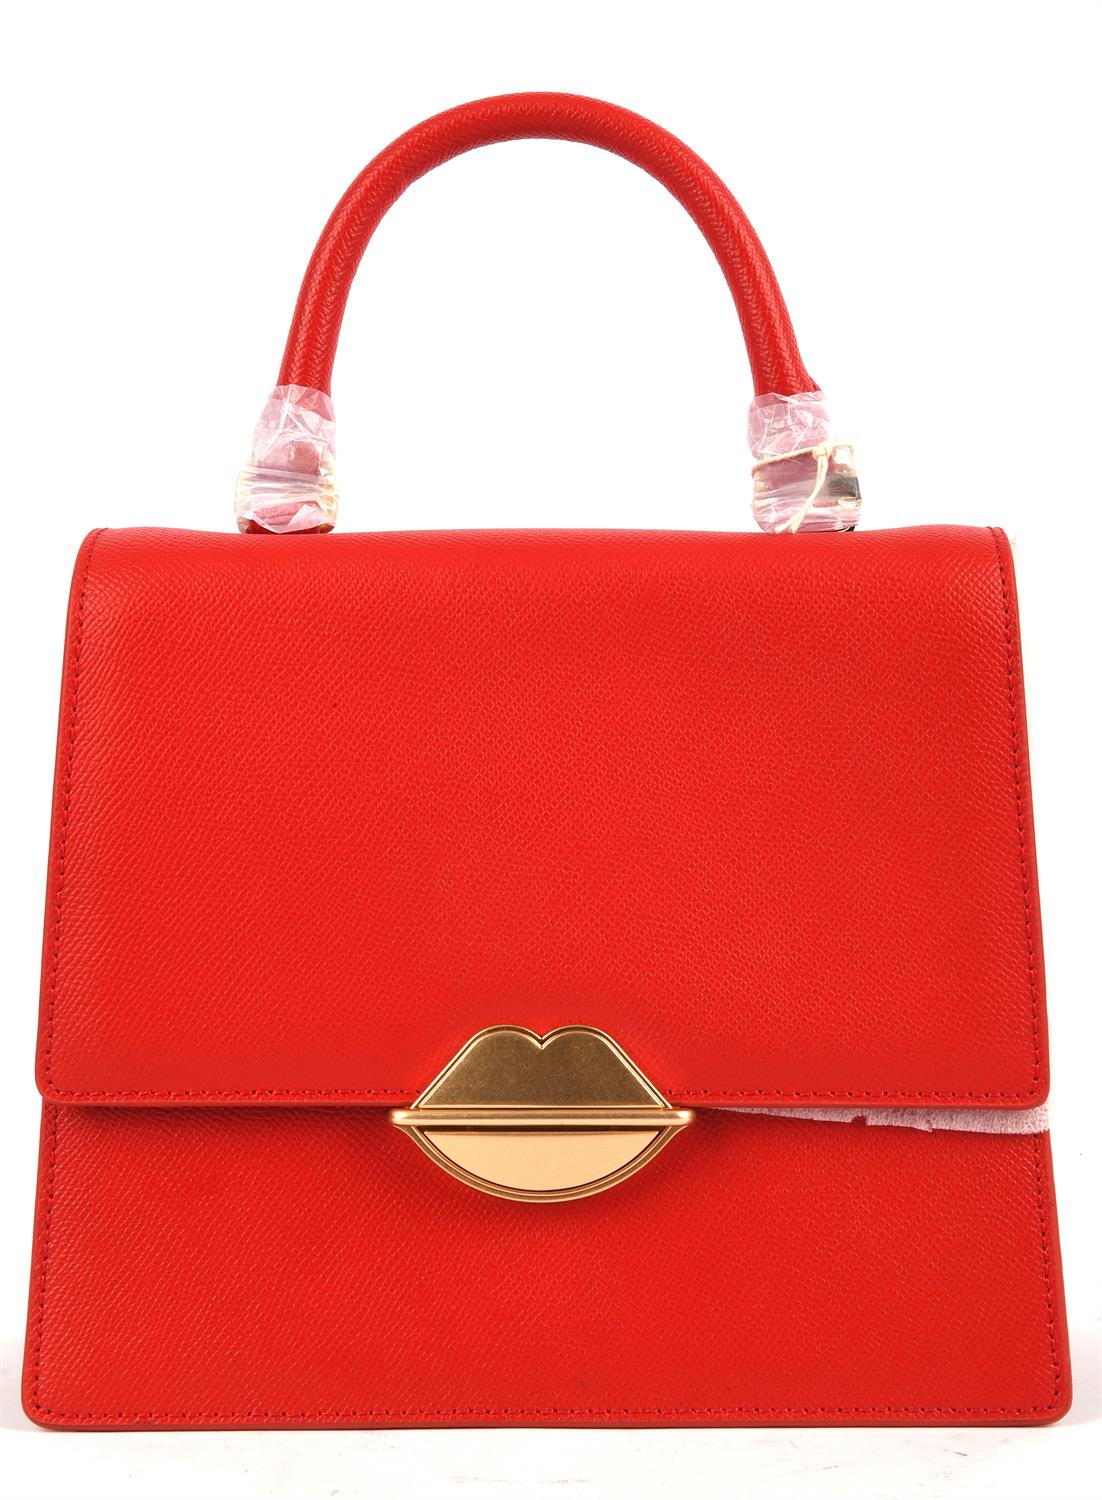 LULU GUINNESS lipstick red leather and suede framed handbag with long strap, dust bag and paperwork. - Image 2 of 6